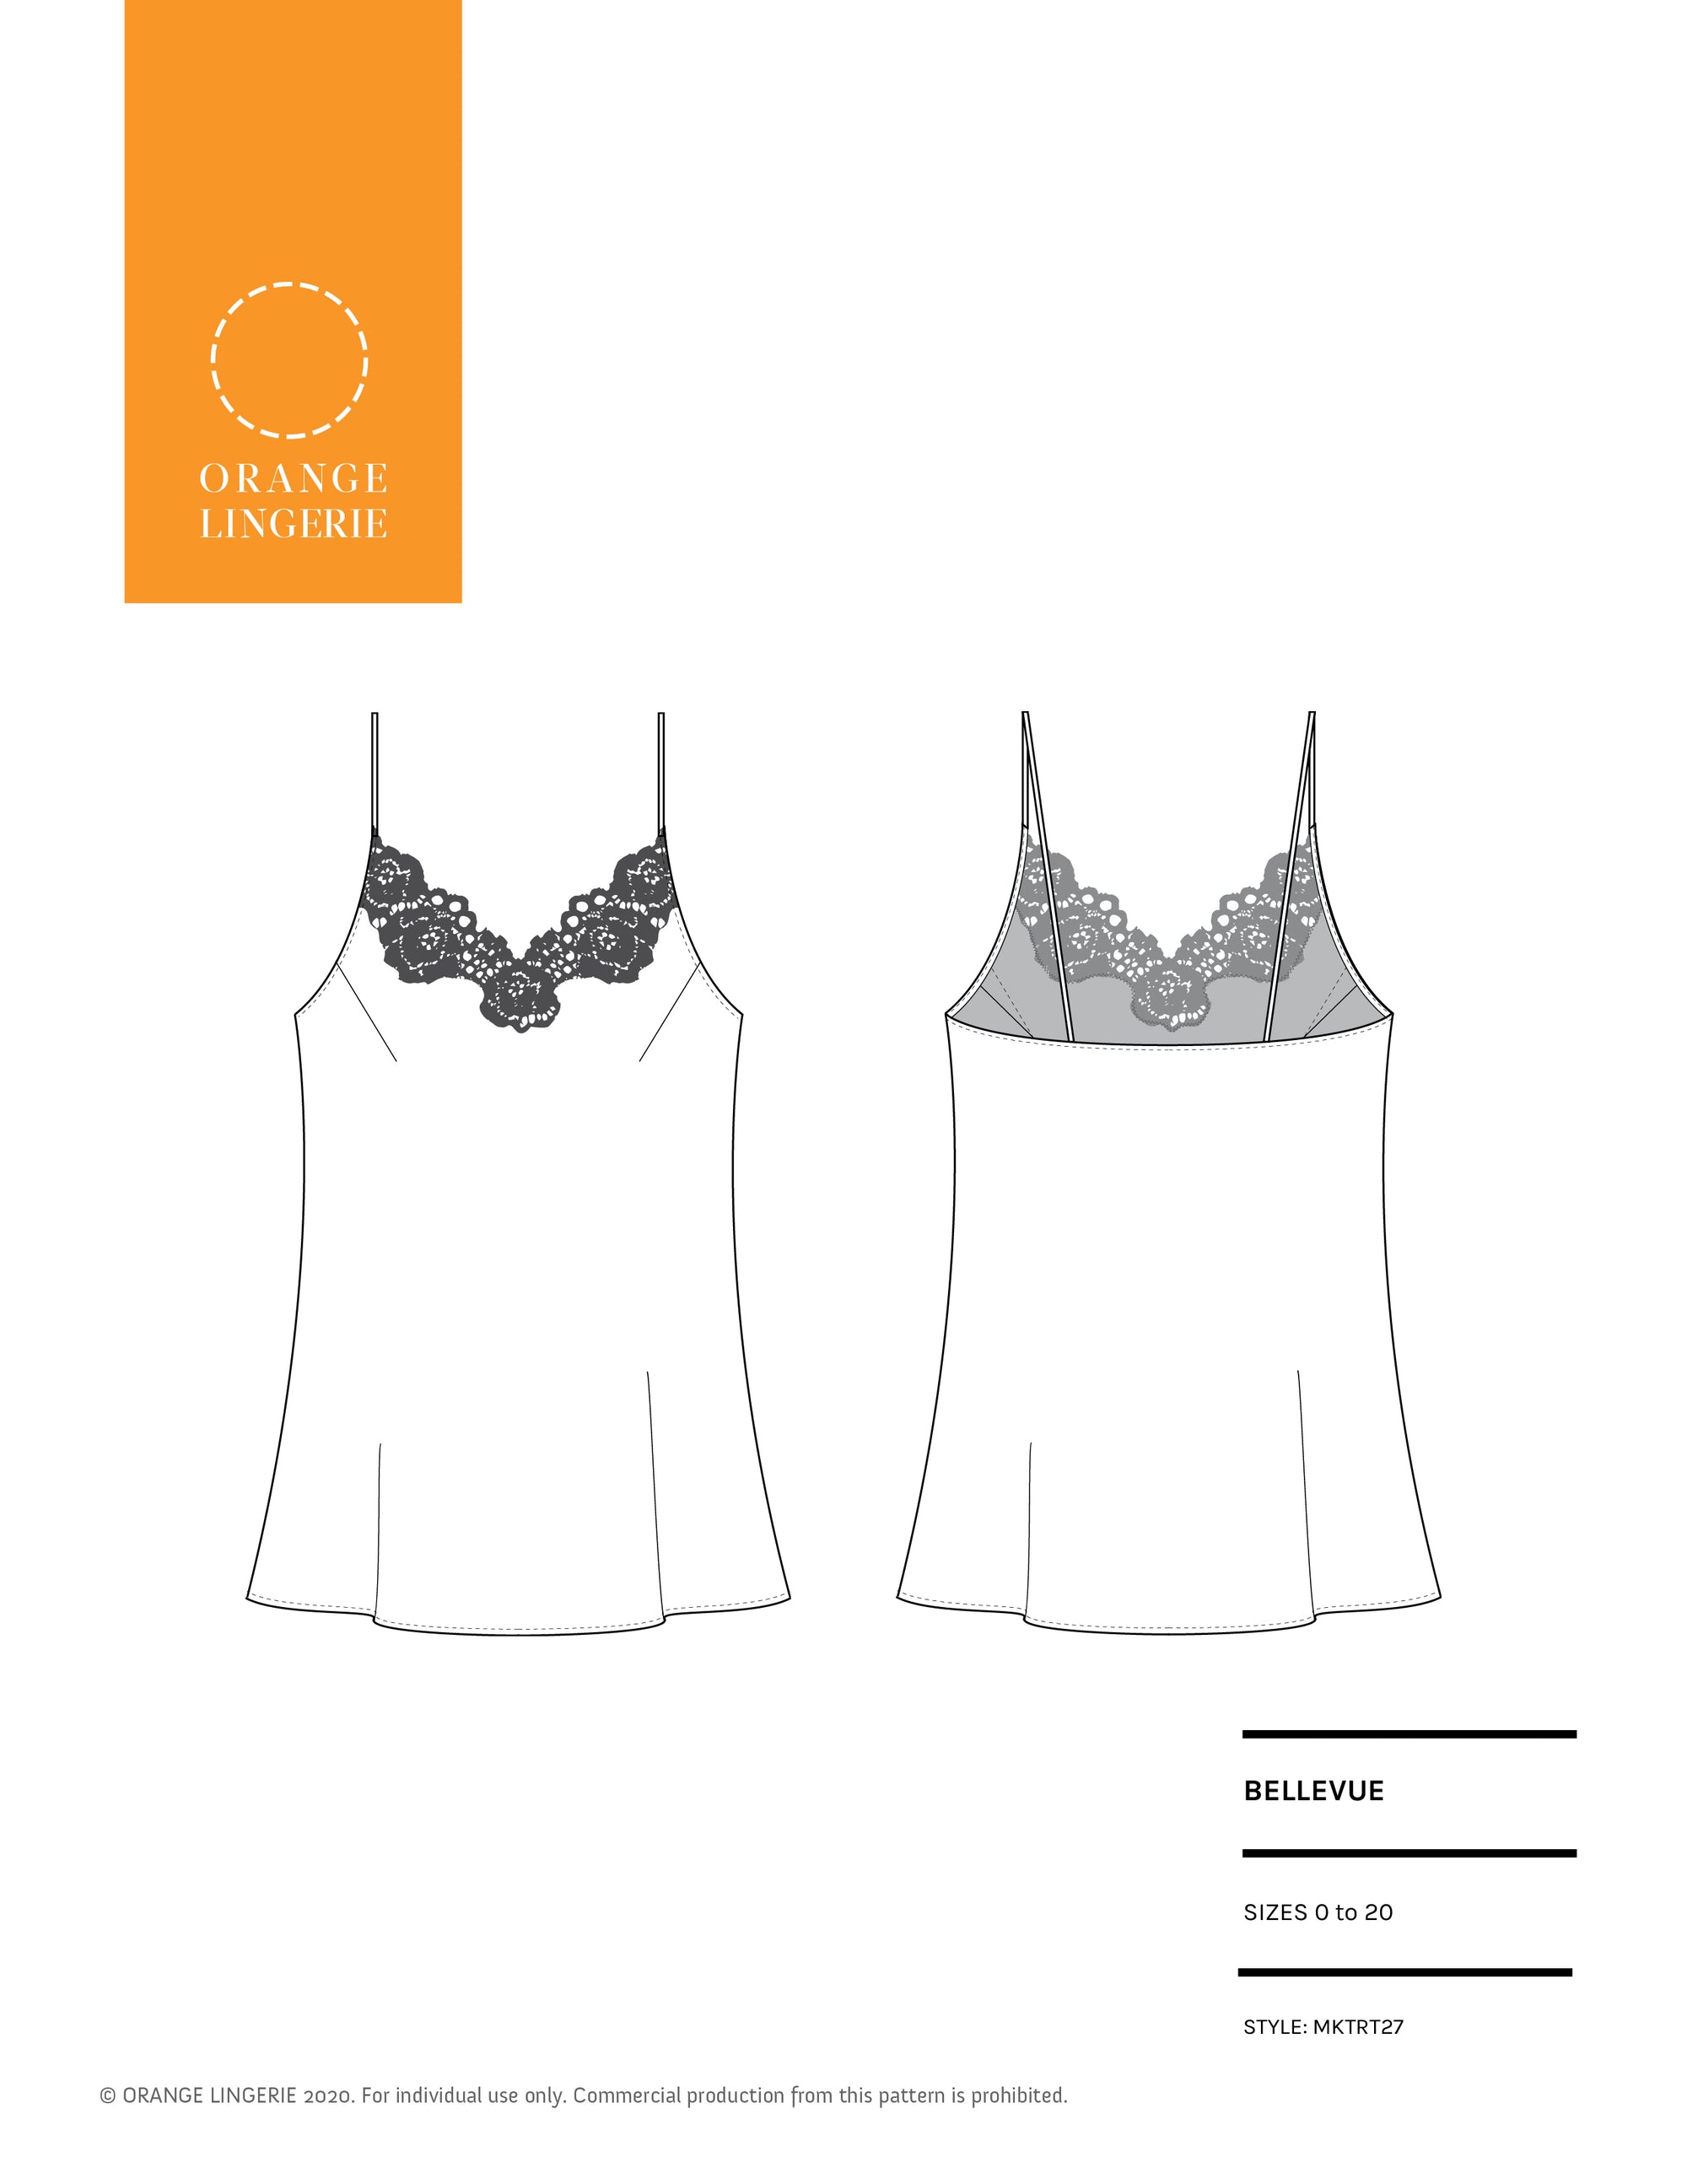 Sommar Camisole PDF Sewing Pattern With Built in Bralette. Low